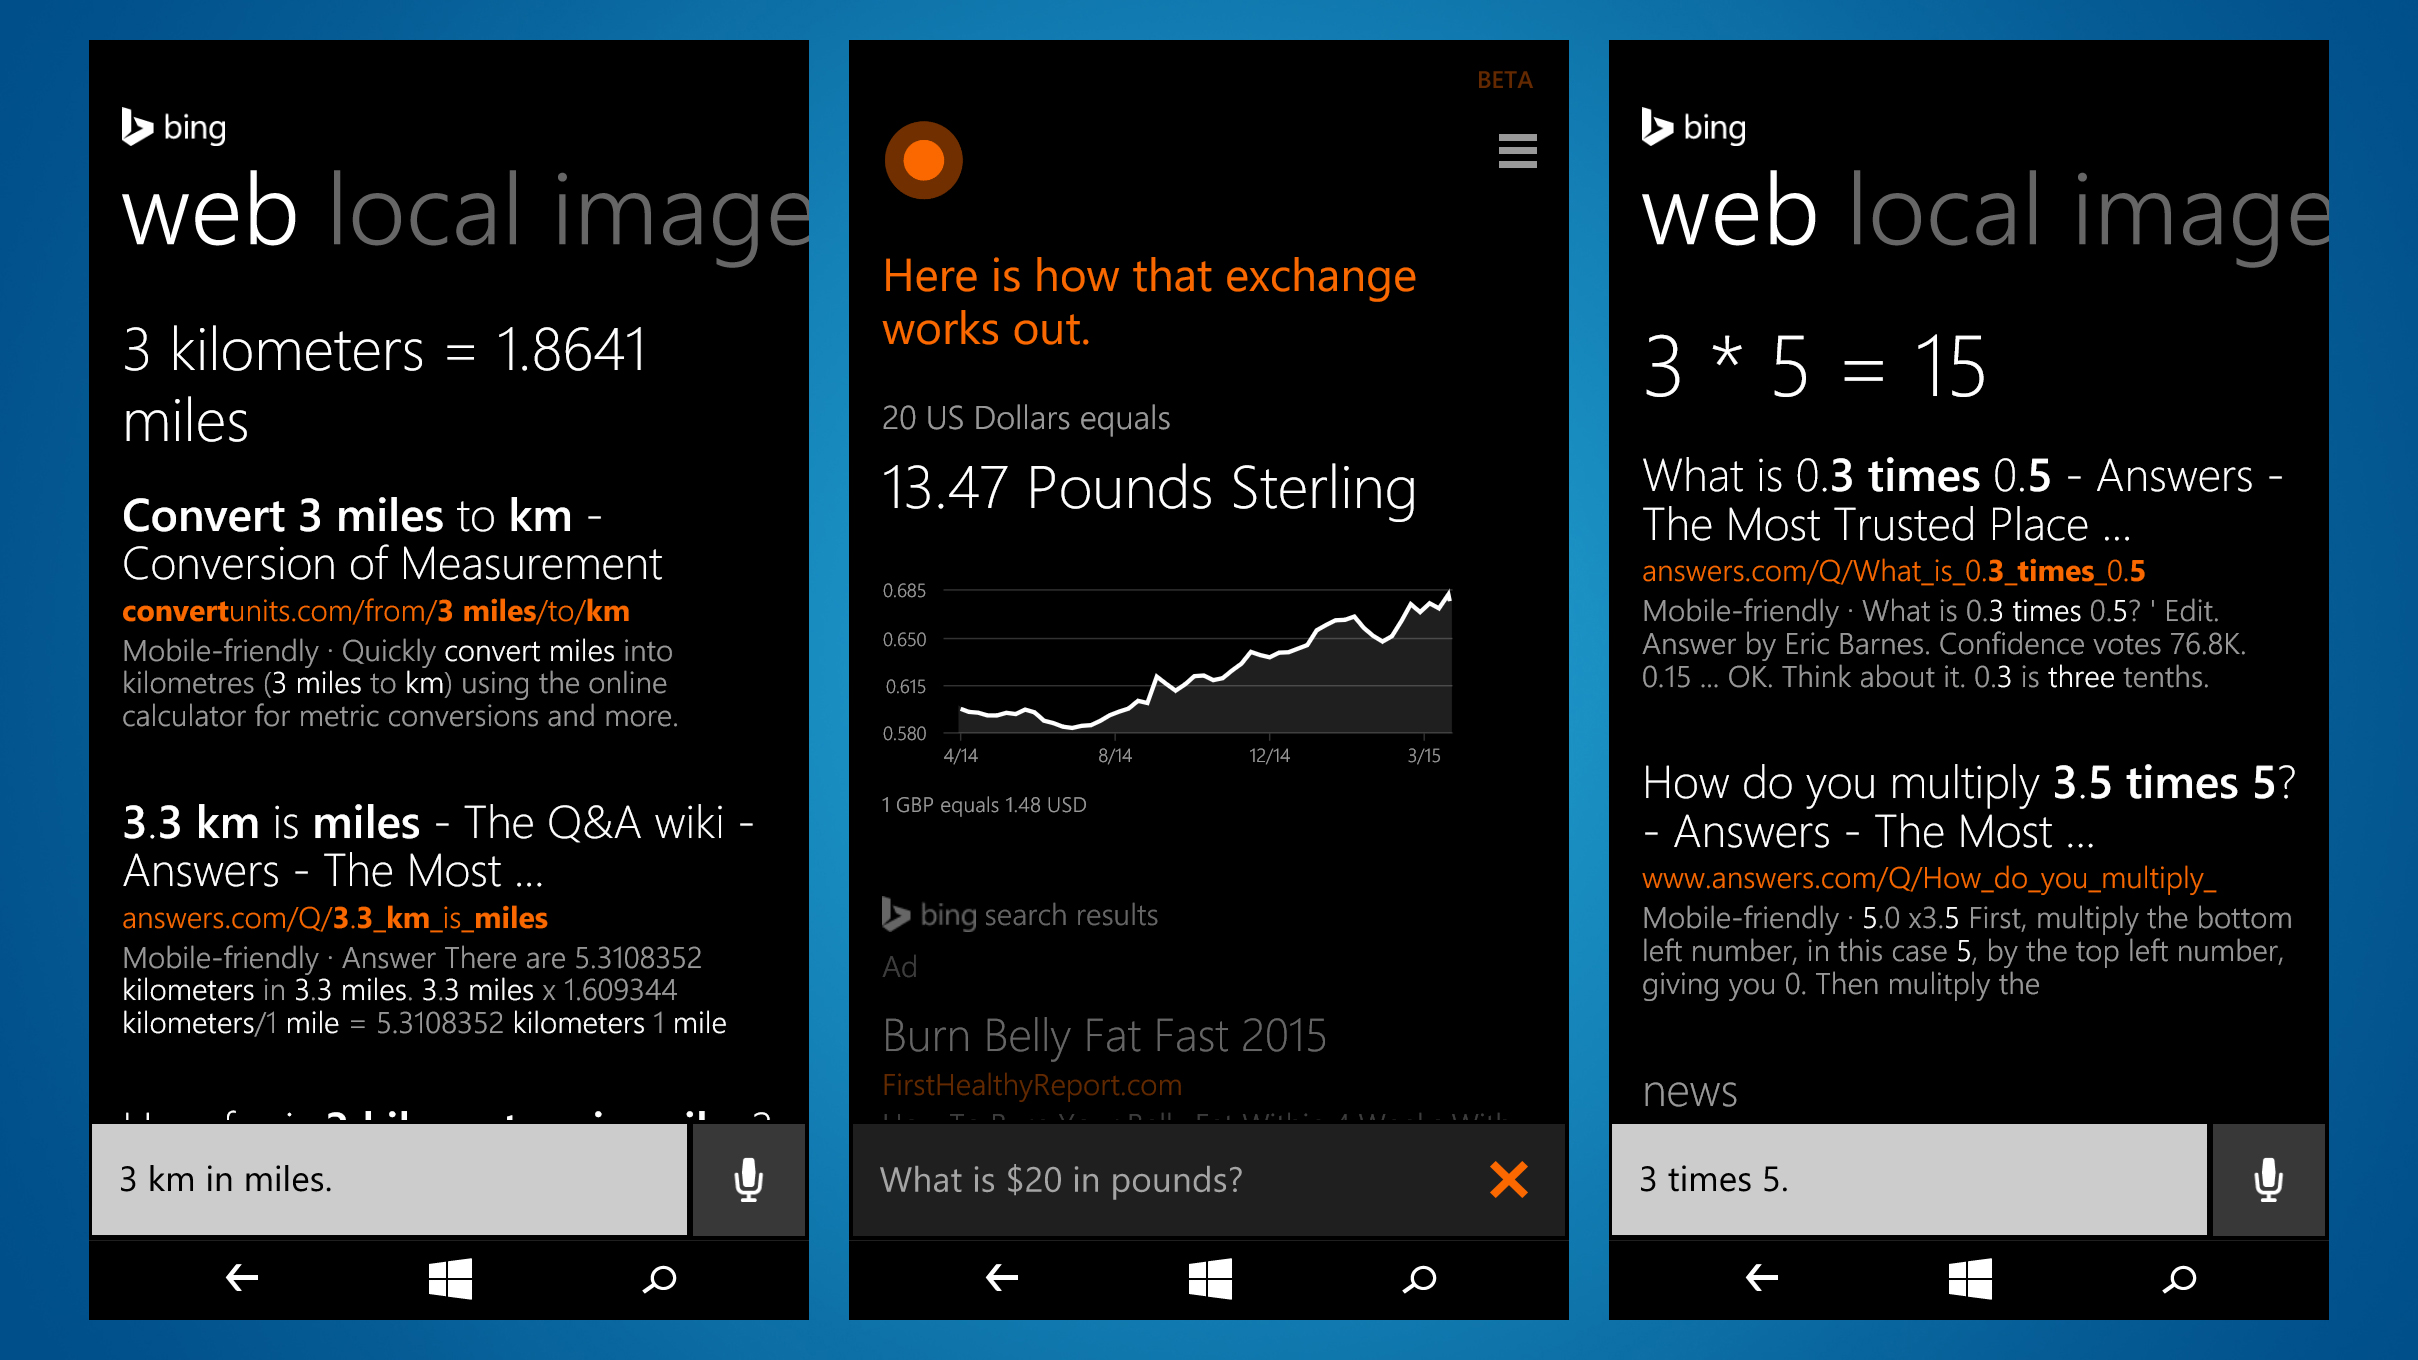 18 Useful Voice Commands To Try With Cortana